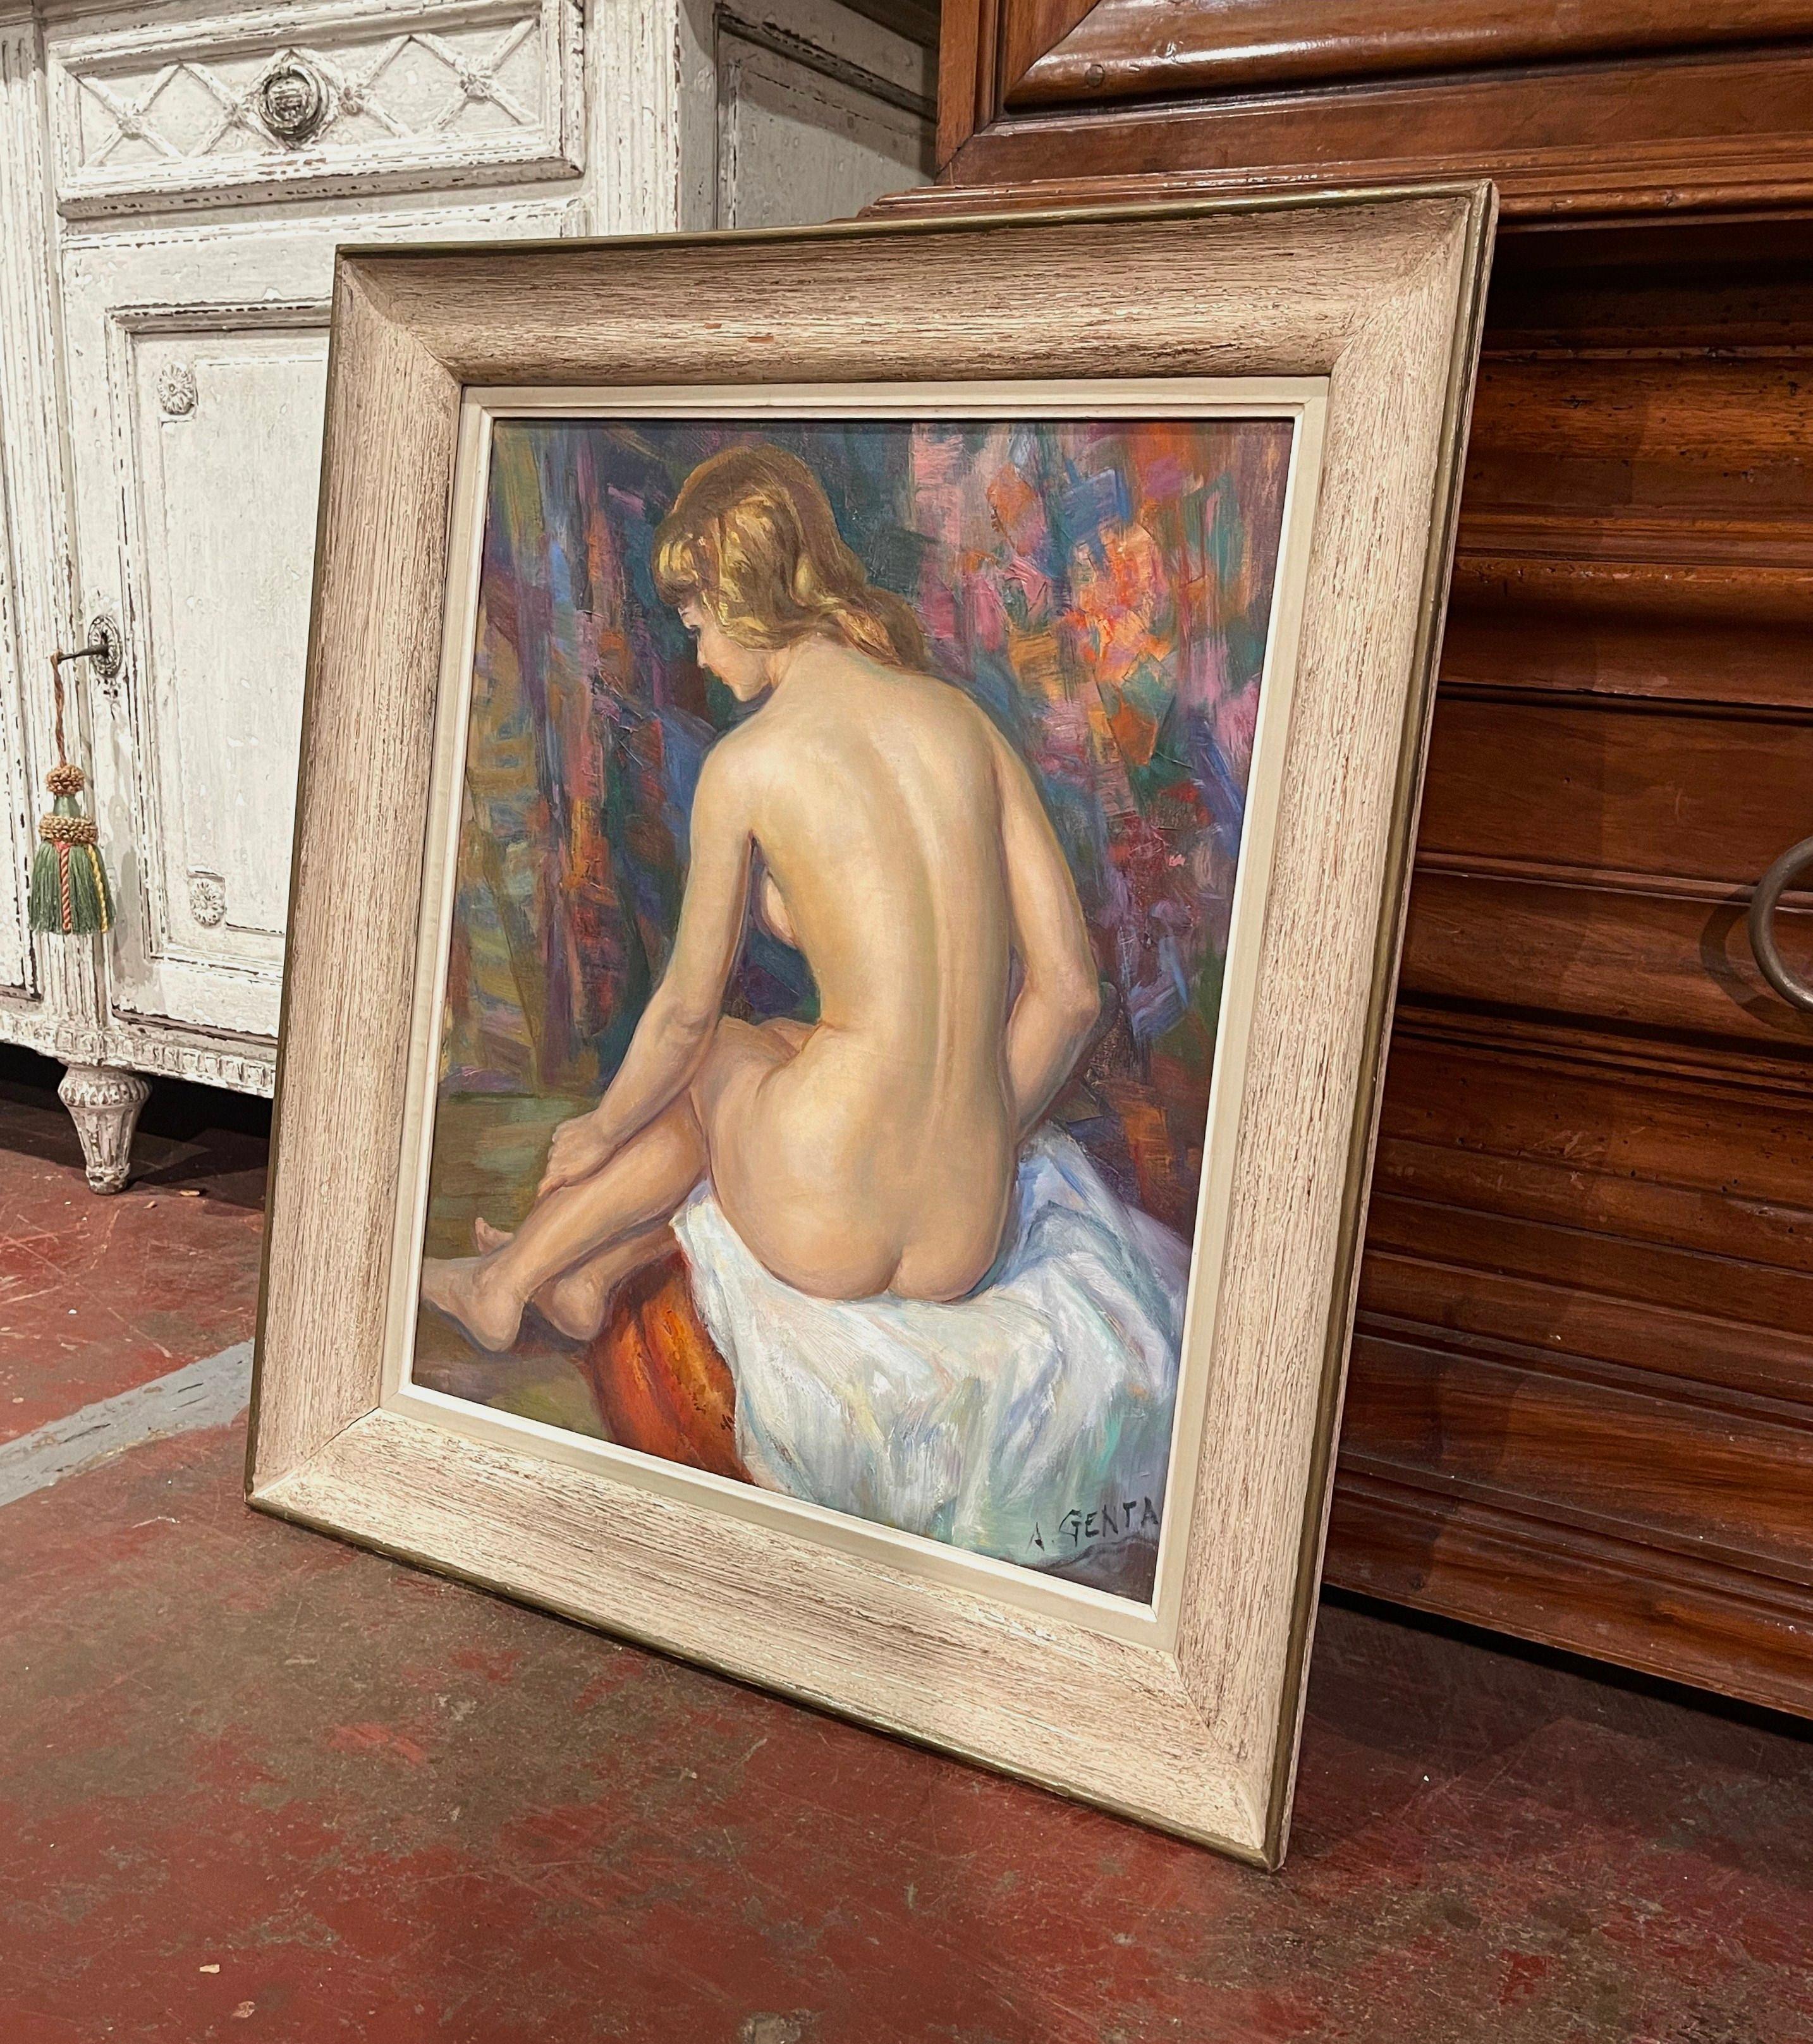 Decorate a bathroom or bedroom with this elegant oil on canvas painting. Painted in Paris, France circa 1950, and set in the original wooden frame, the artwork depicts a nude beauty sited on a stool. The painting is signed in the lower right corner